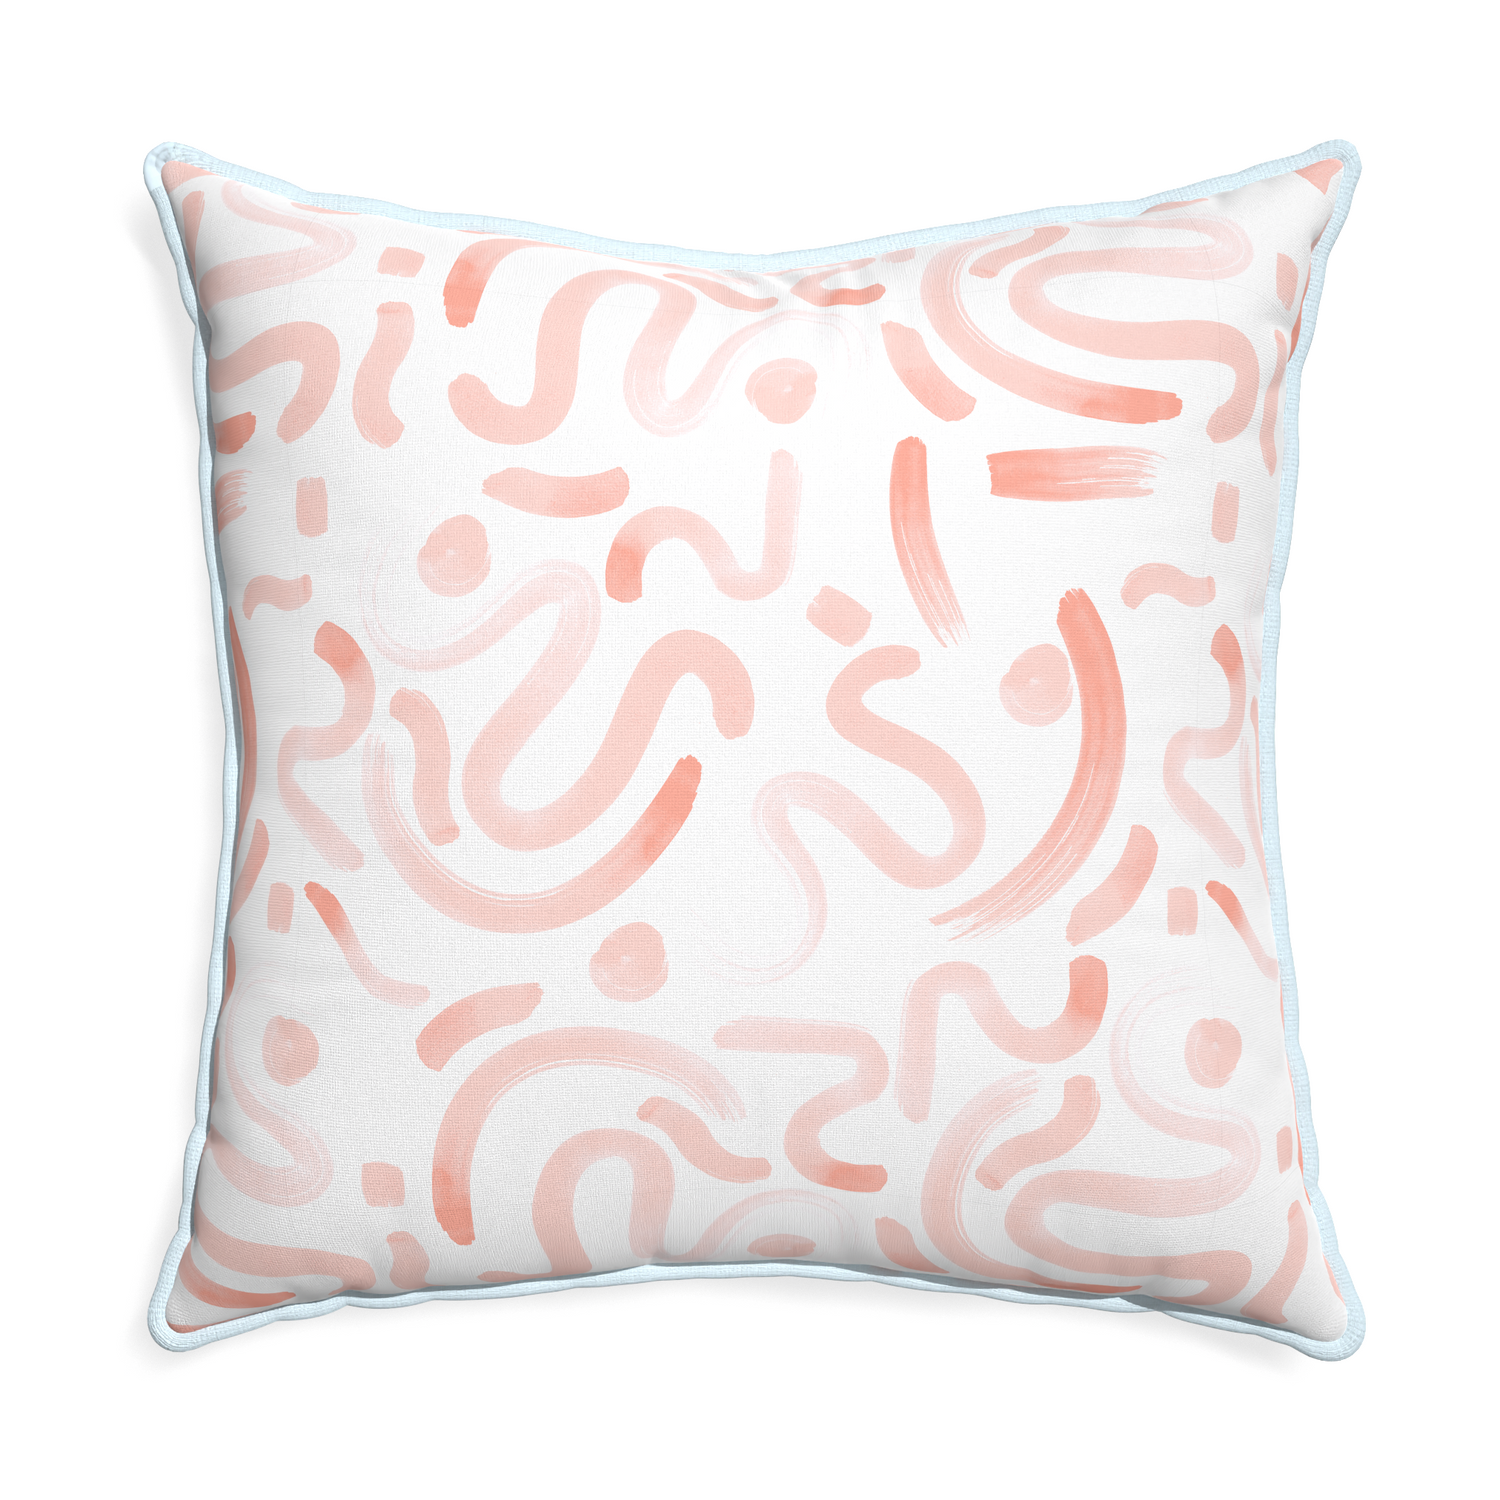 Euro-sham hockney pink custom pillow with powder piping on white background